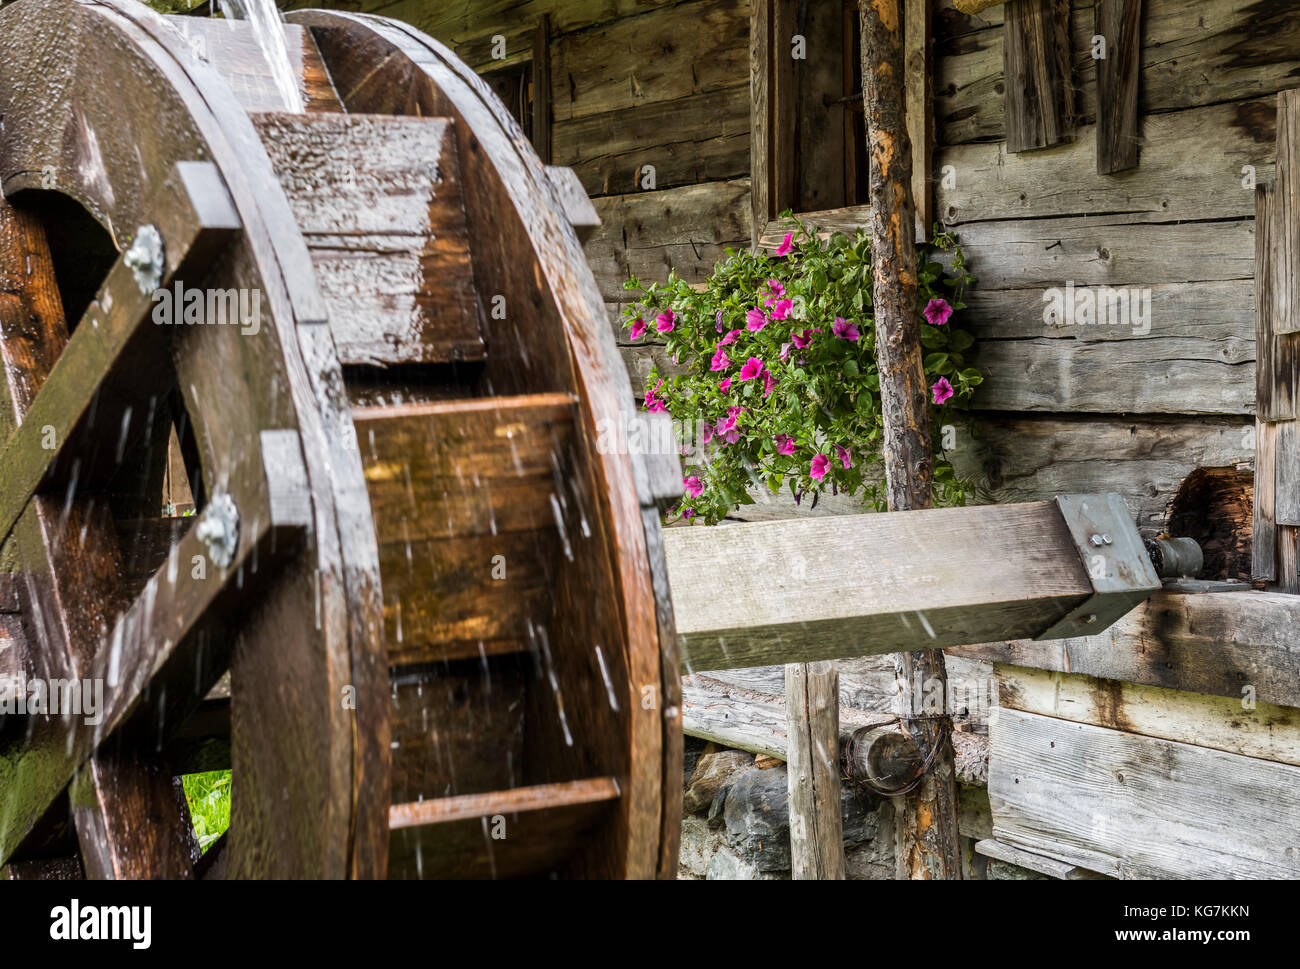 Habachtal, Austria - September 29, 2017: Water Wheel at the Thuringer Hutte with old cabin in the valley with the Smaragdweg, Austria. Stock Photo